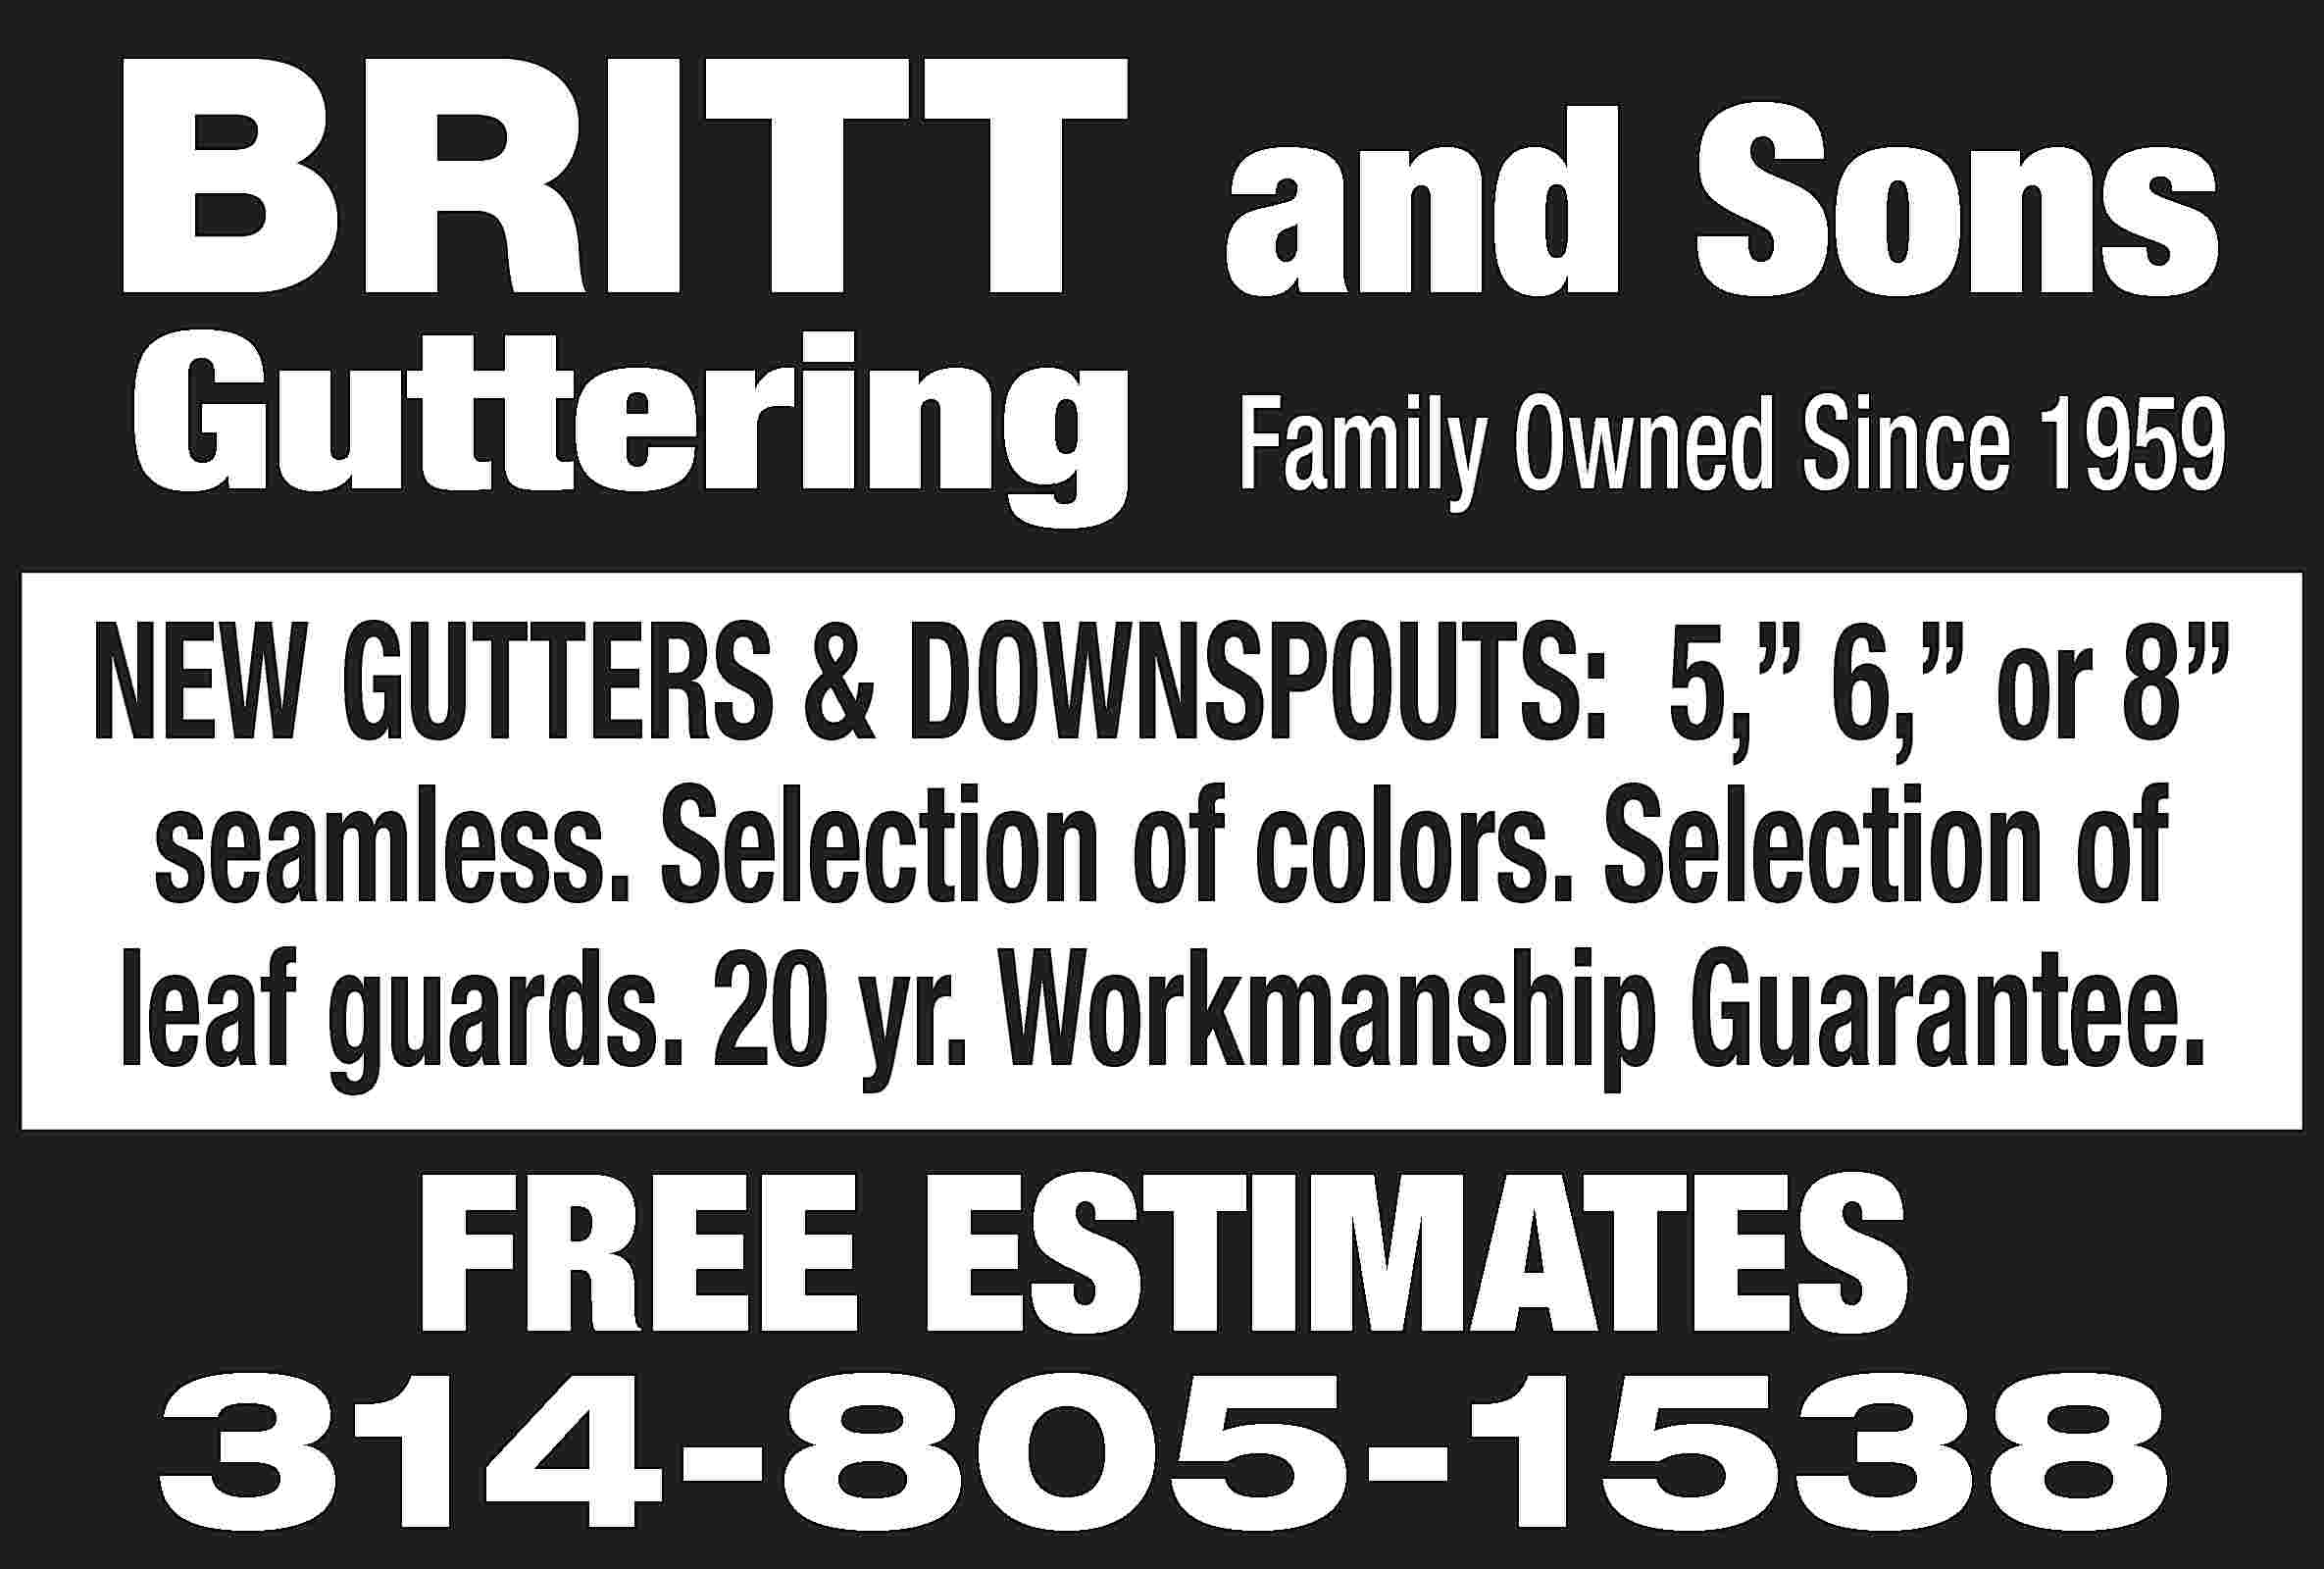 BRITT and Sons Guttering Family  BRITT and Sons Guttering Family Owned Since 1959 NEW GUTTERS & DOWNSPOUTS: 5,” 6,” or 8” seamless. Selection of colors. Selection of leaf guards. 20 yr. Workmanship Guarantee. FREE ESTIMATES 314-805-1538